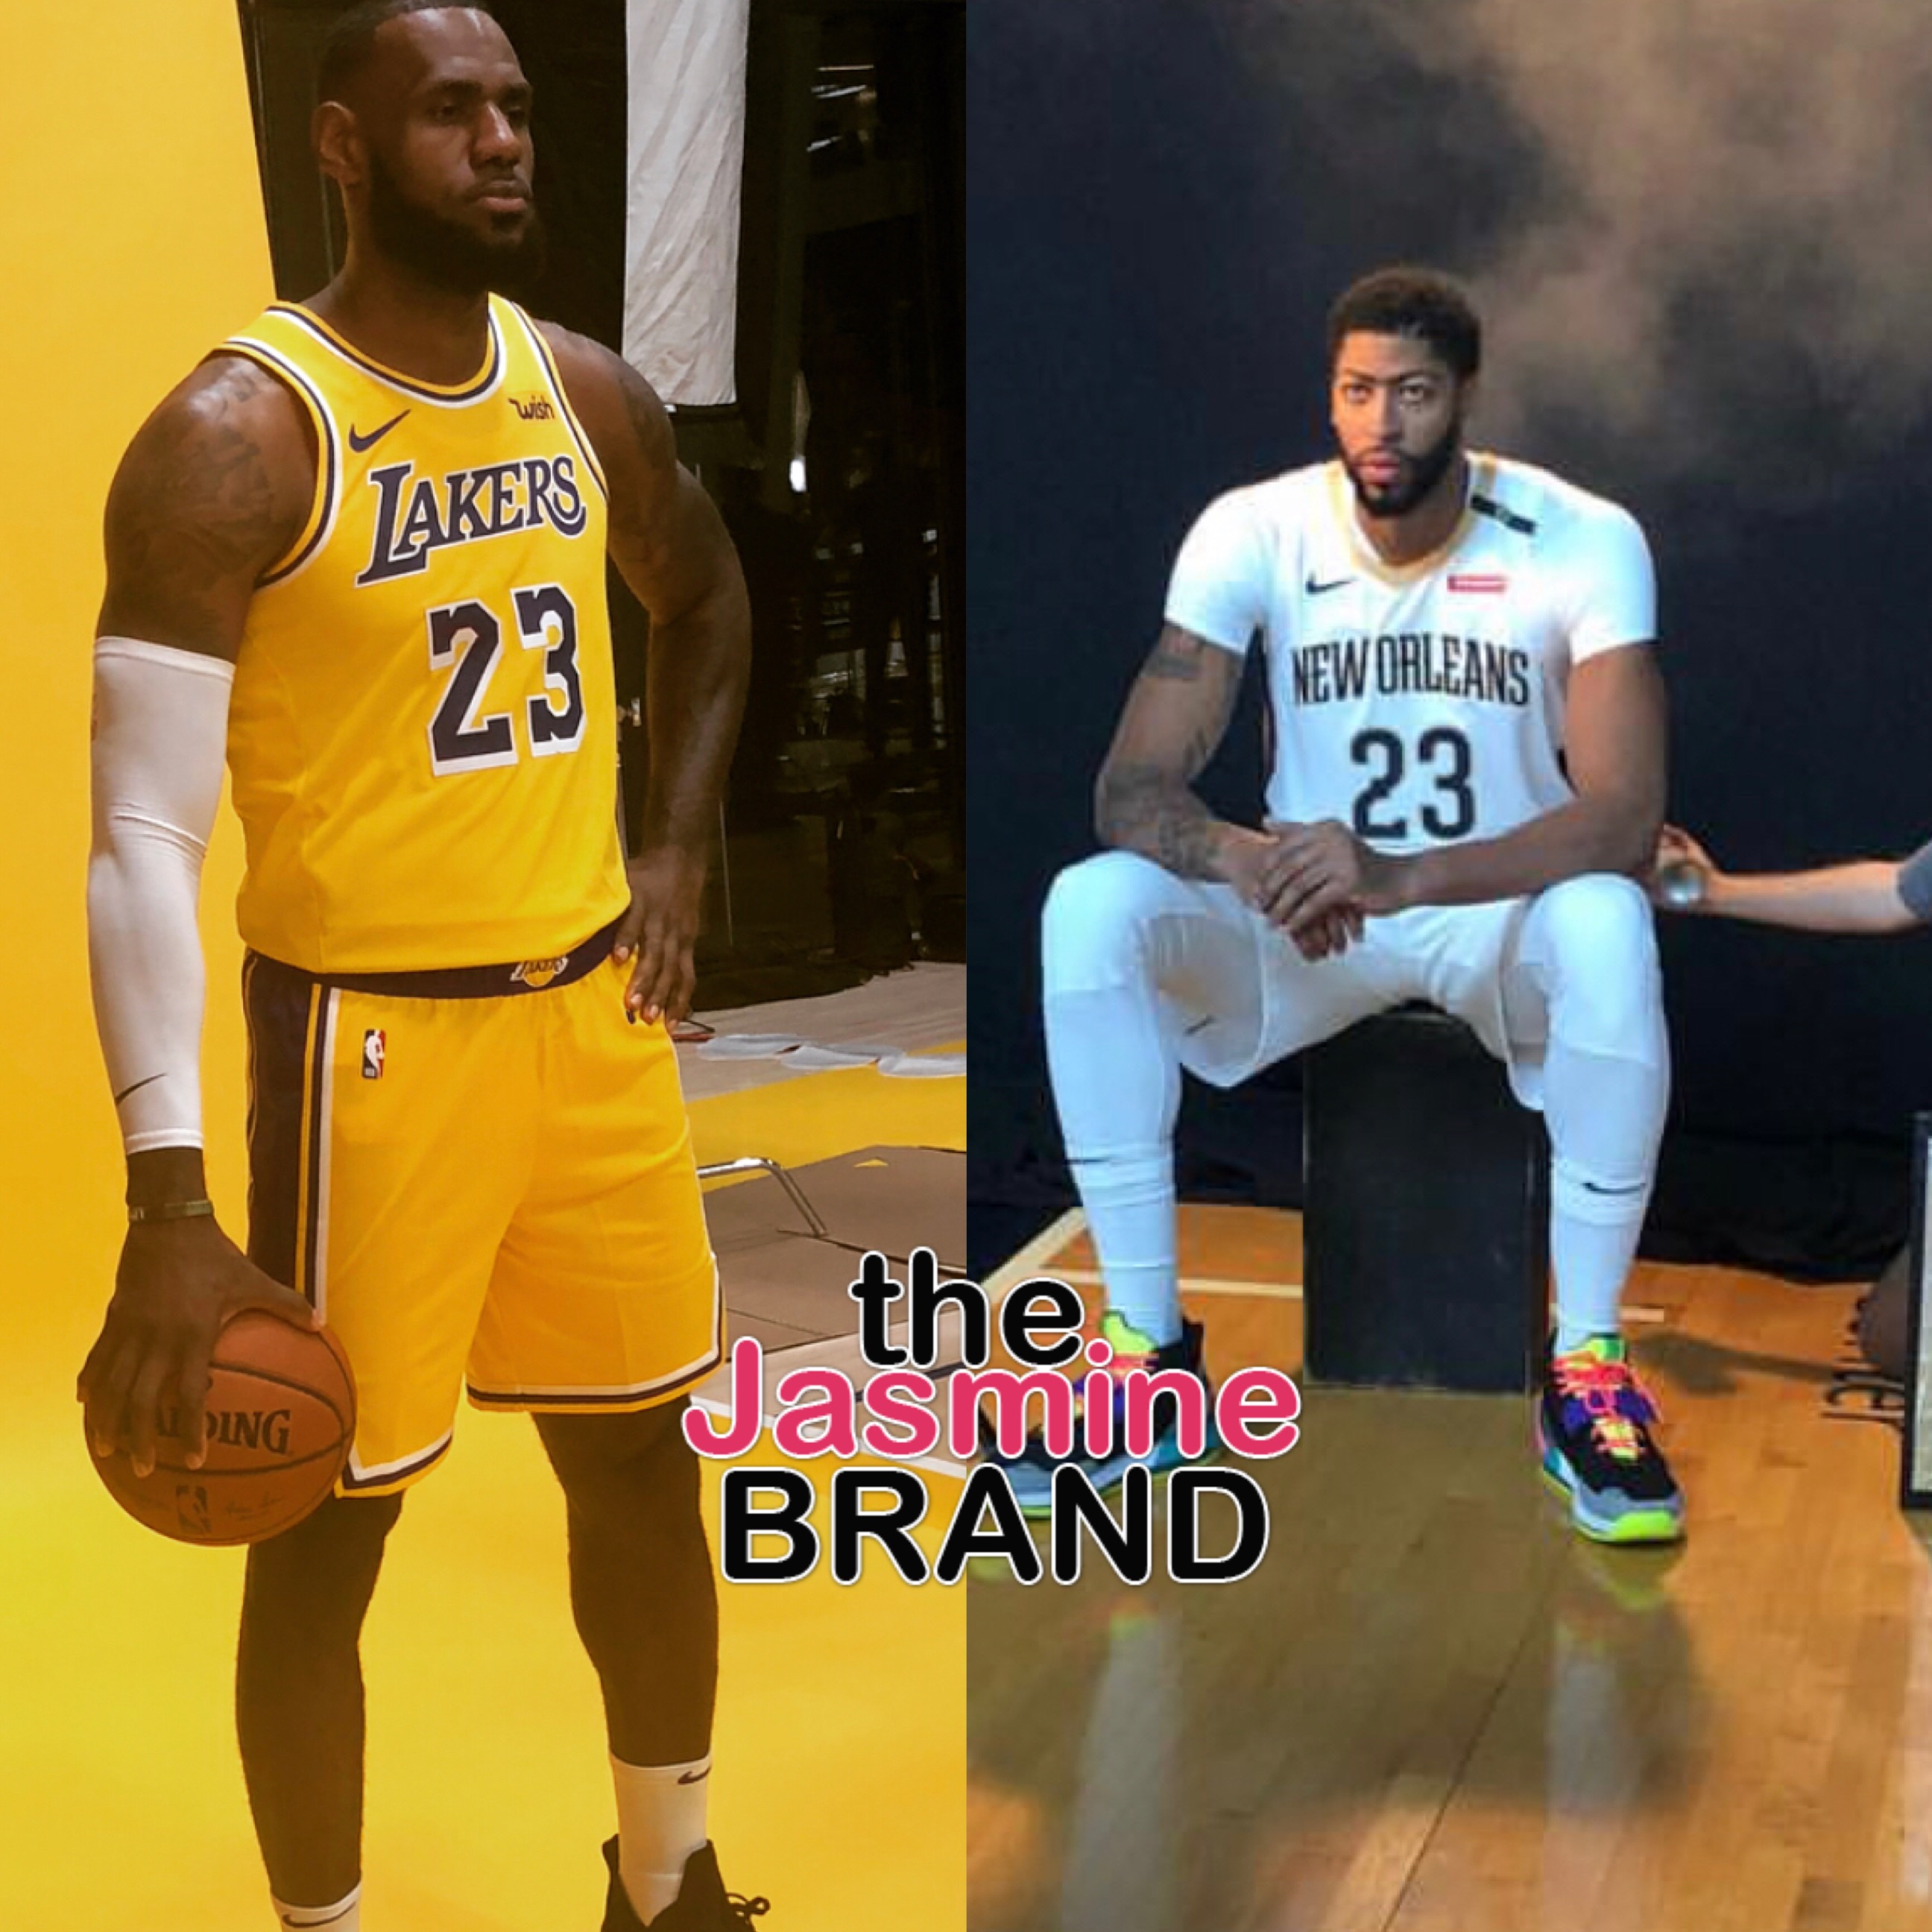 Lakers' LeBron James hints at new number after gifting No. 23 to